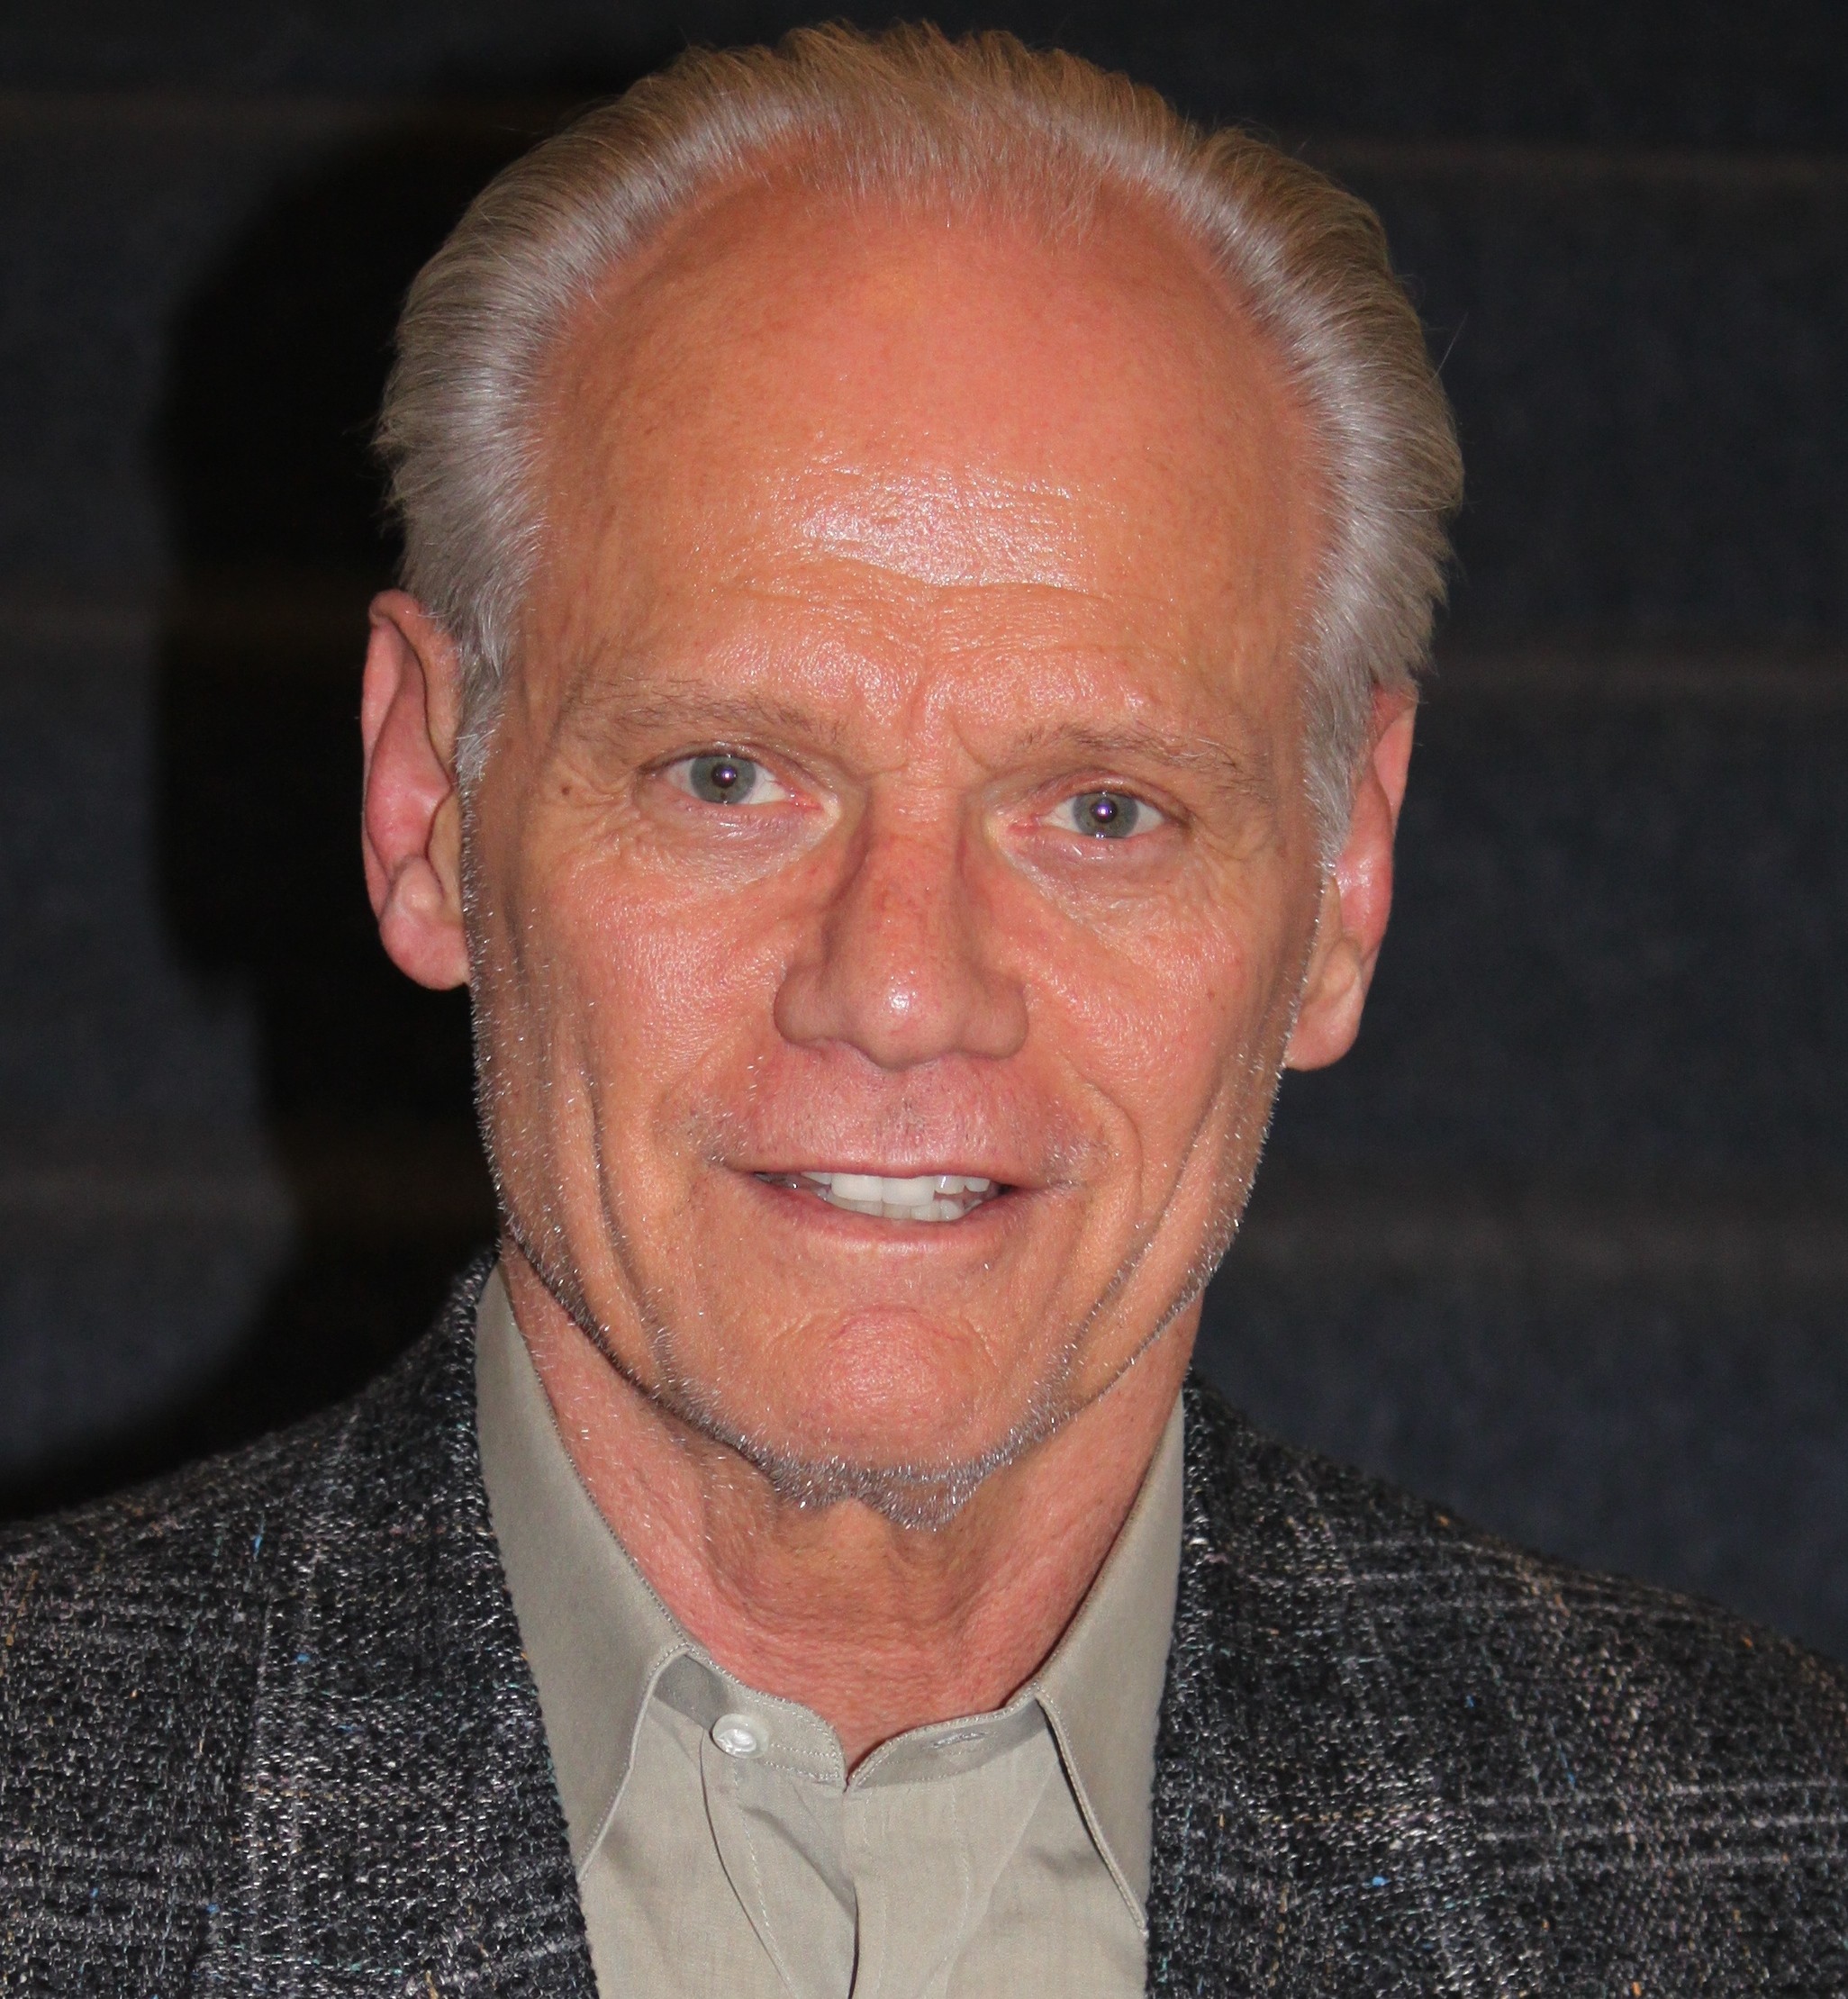 Fred Dryer Speaking Fee And Booking Agent Contact